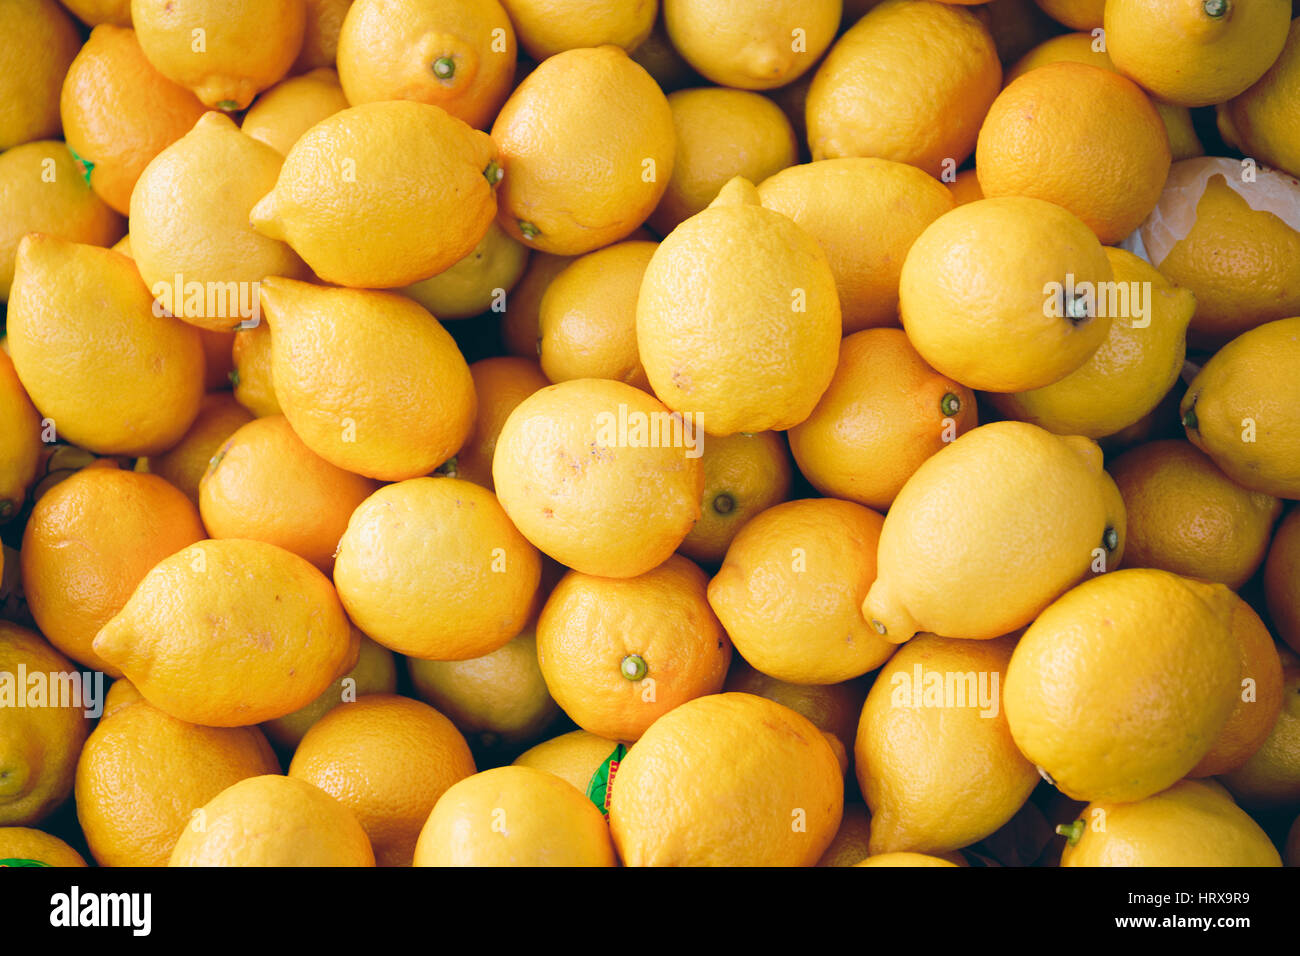 High angle view of a pile of lemons. Traditional food market, León. Spain Stock Photo